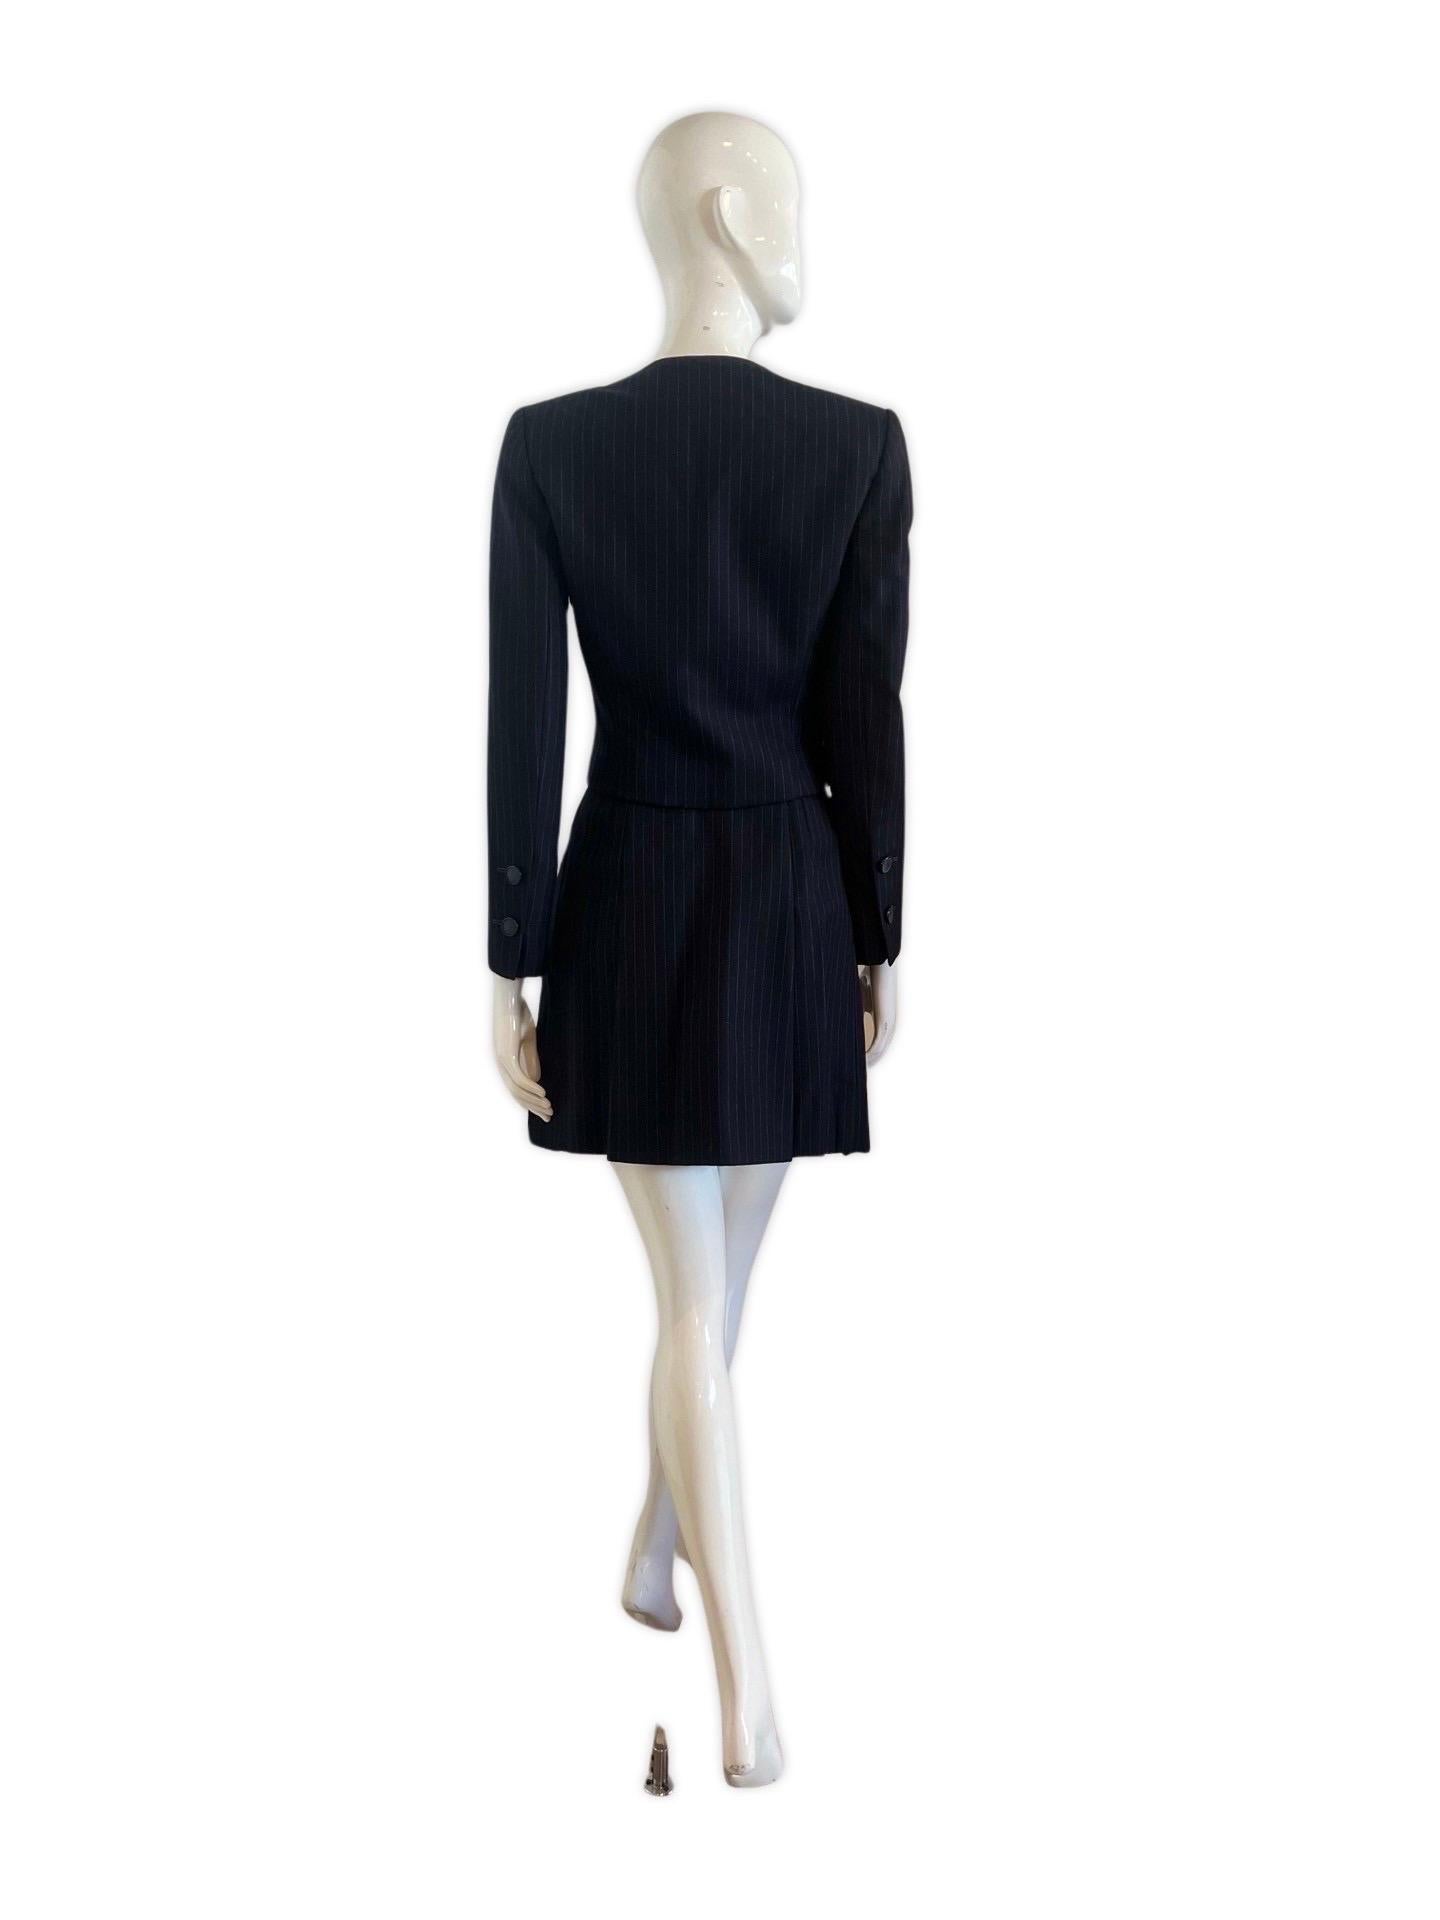 An incredible, mint condition Galanos pinstripe wool skirt suit with a pleated school girl mini and short structured jacket. James Galanos (1924–2016) was an American fashion designer known for his exquisite craftsmanship and elegant designs. He